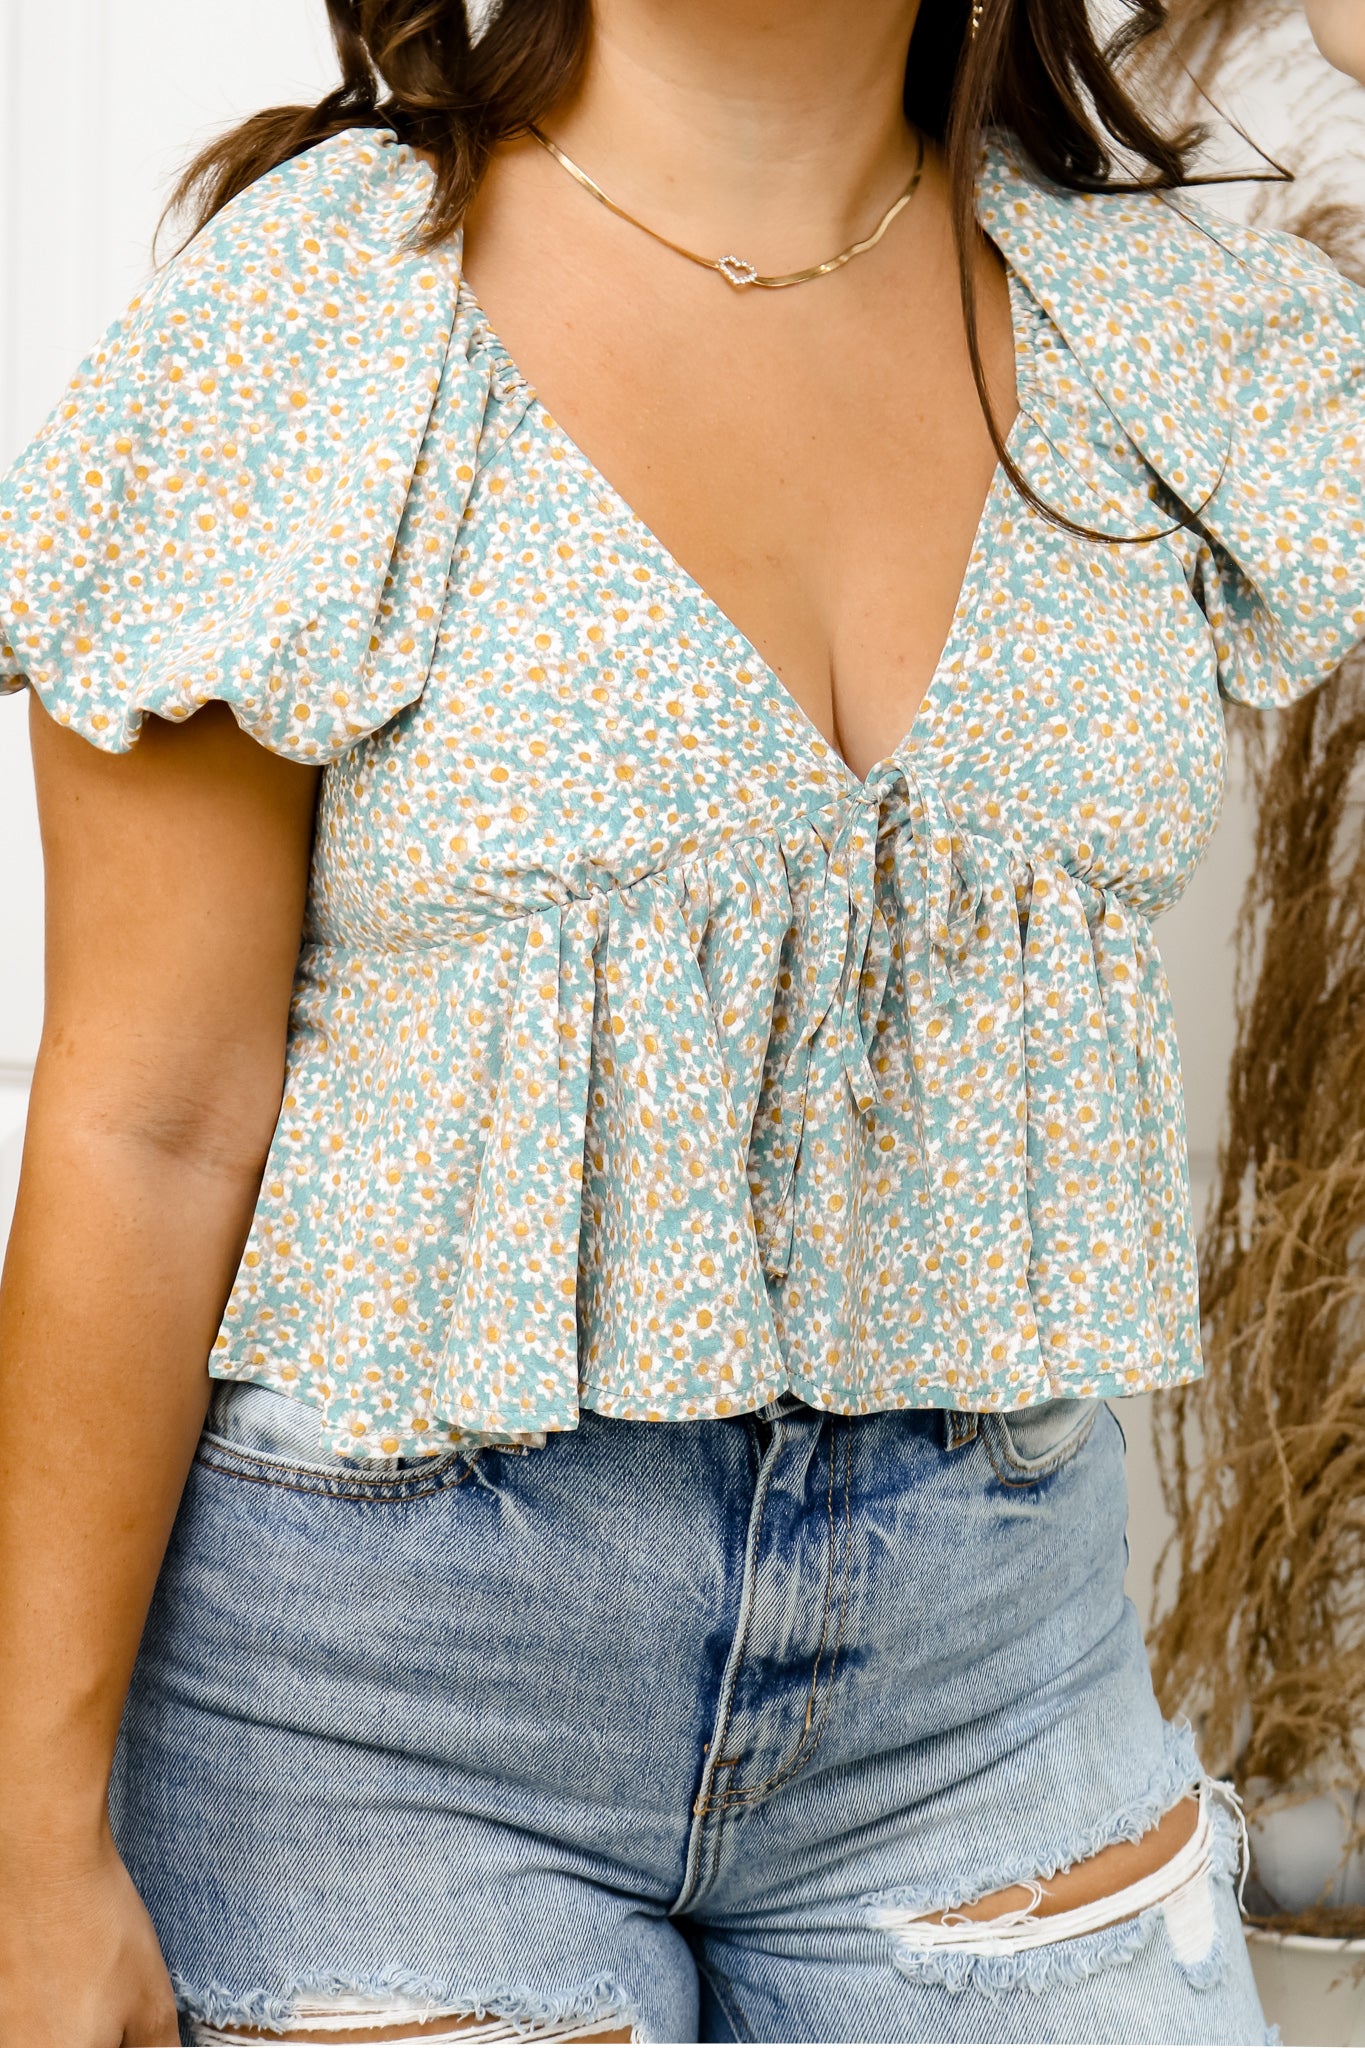 Falling For You Floral Top